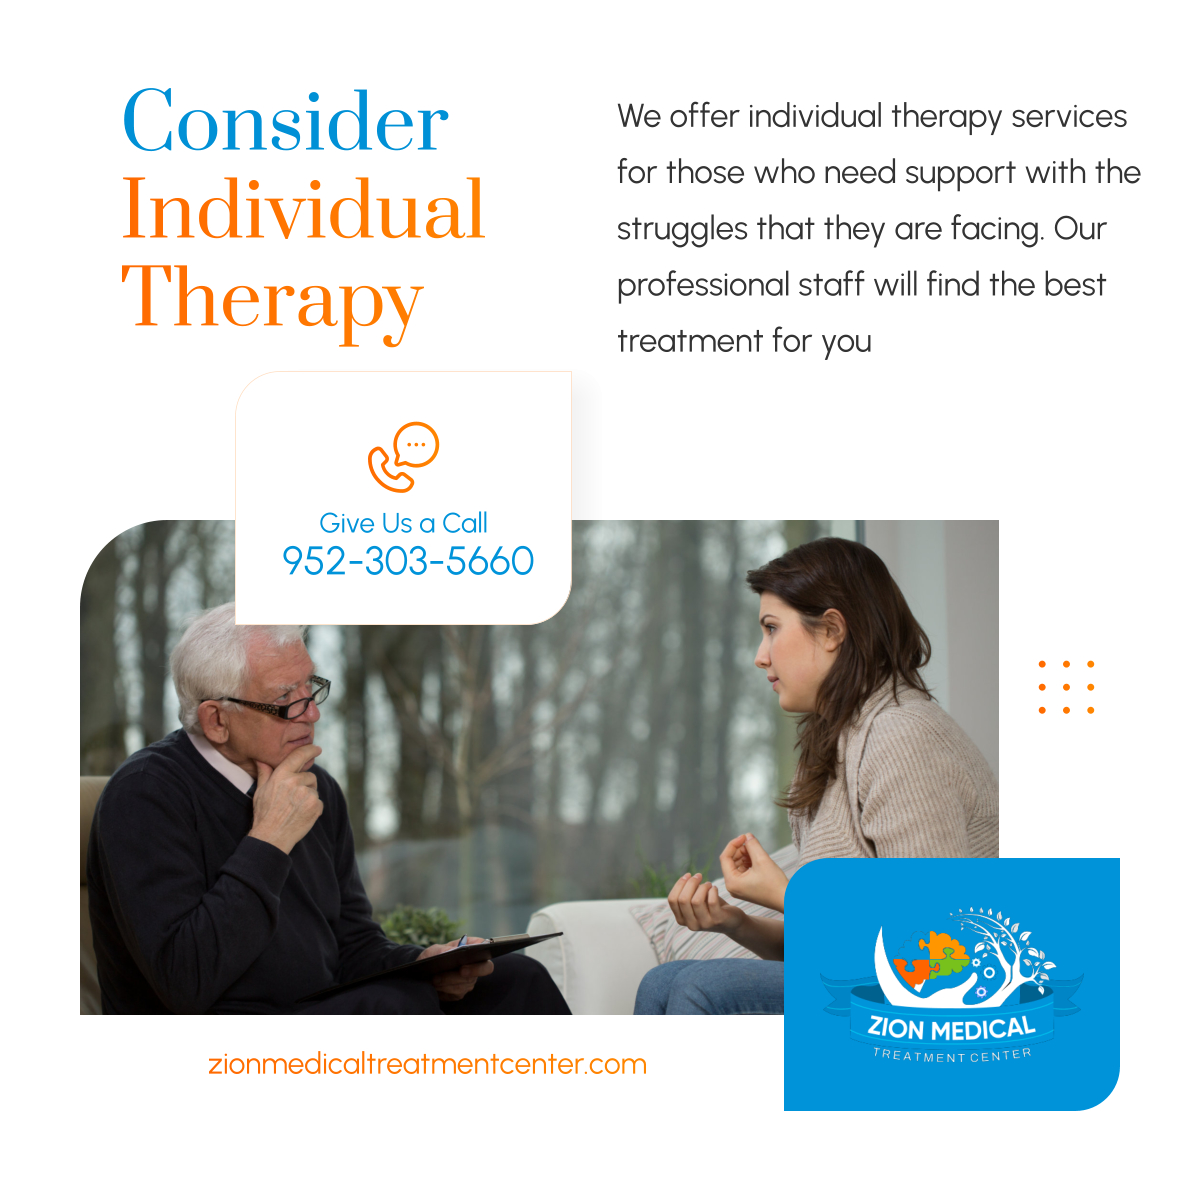 Individual therapy provides one-on-one counseling sessions to help clients achieve overall wellness and recovery. If you are interested, don’t hesitate to give us a call.

#RecoveryCenter #BurnsvilleMN #IndividualTherapy